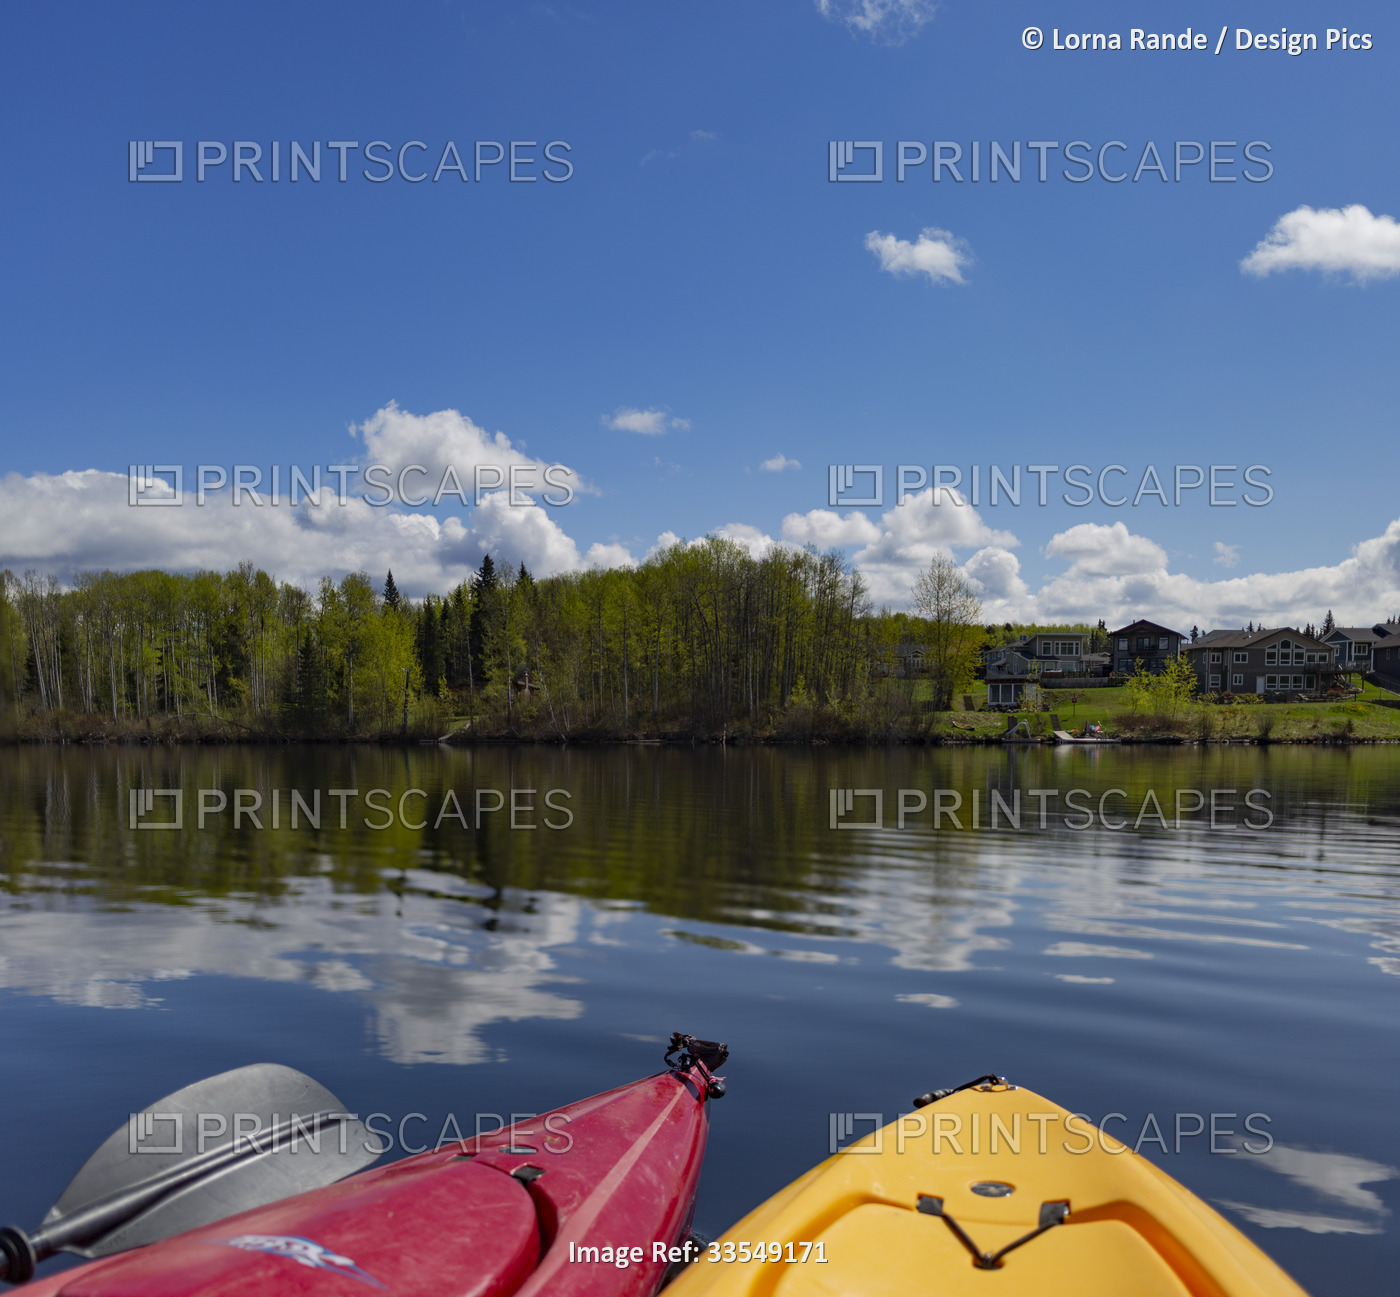 View of lakefront homes along the shore seen from kayaks on the calm waters ...